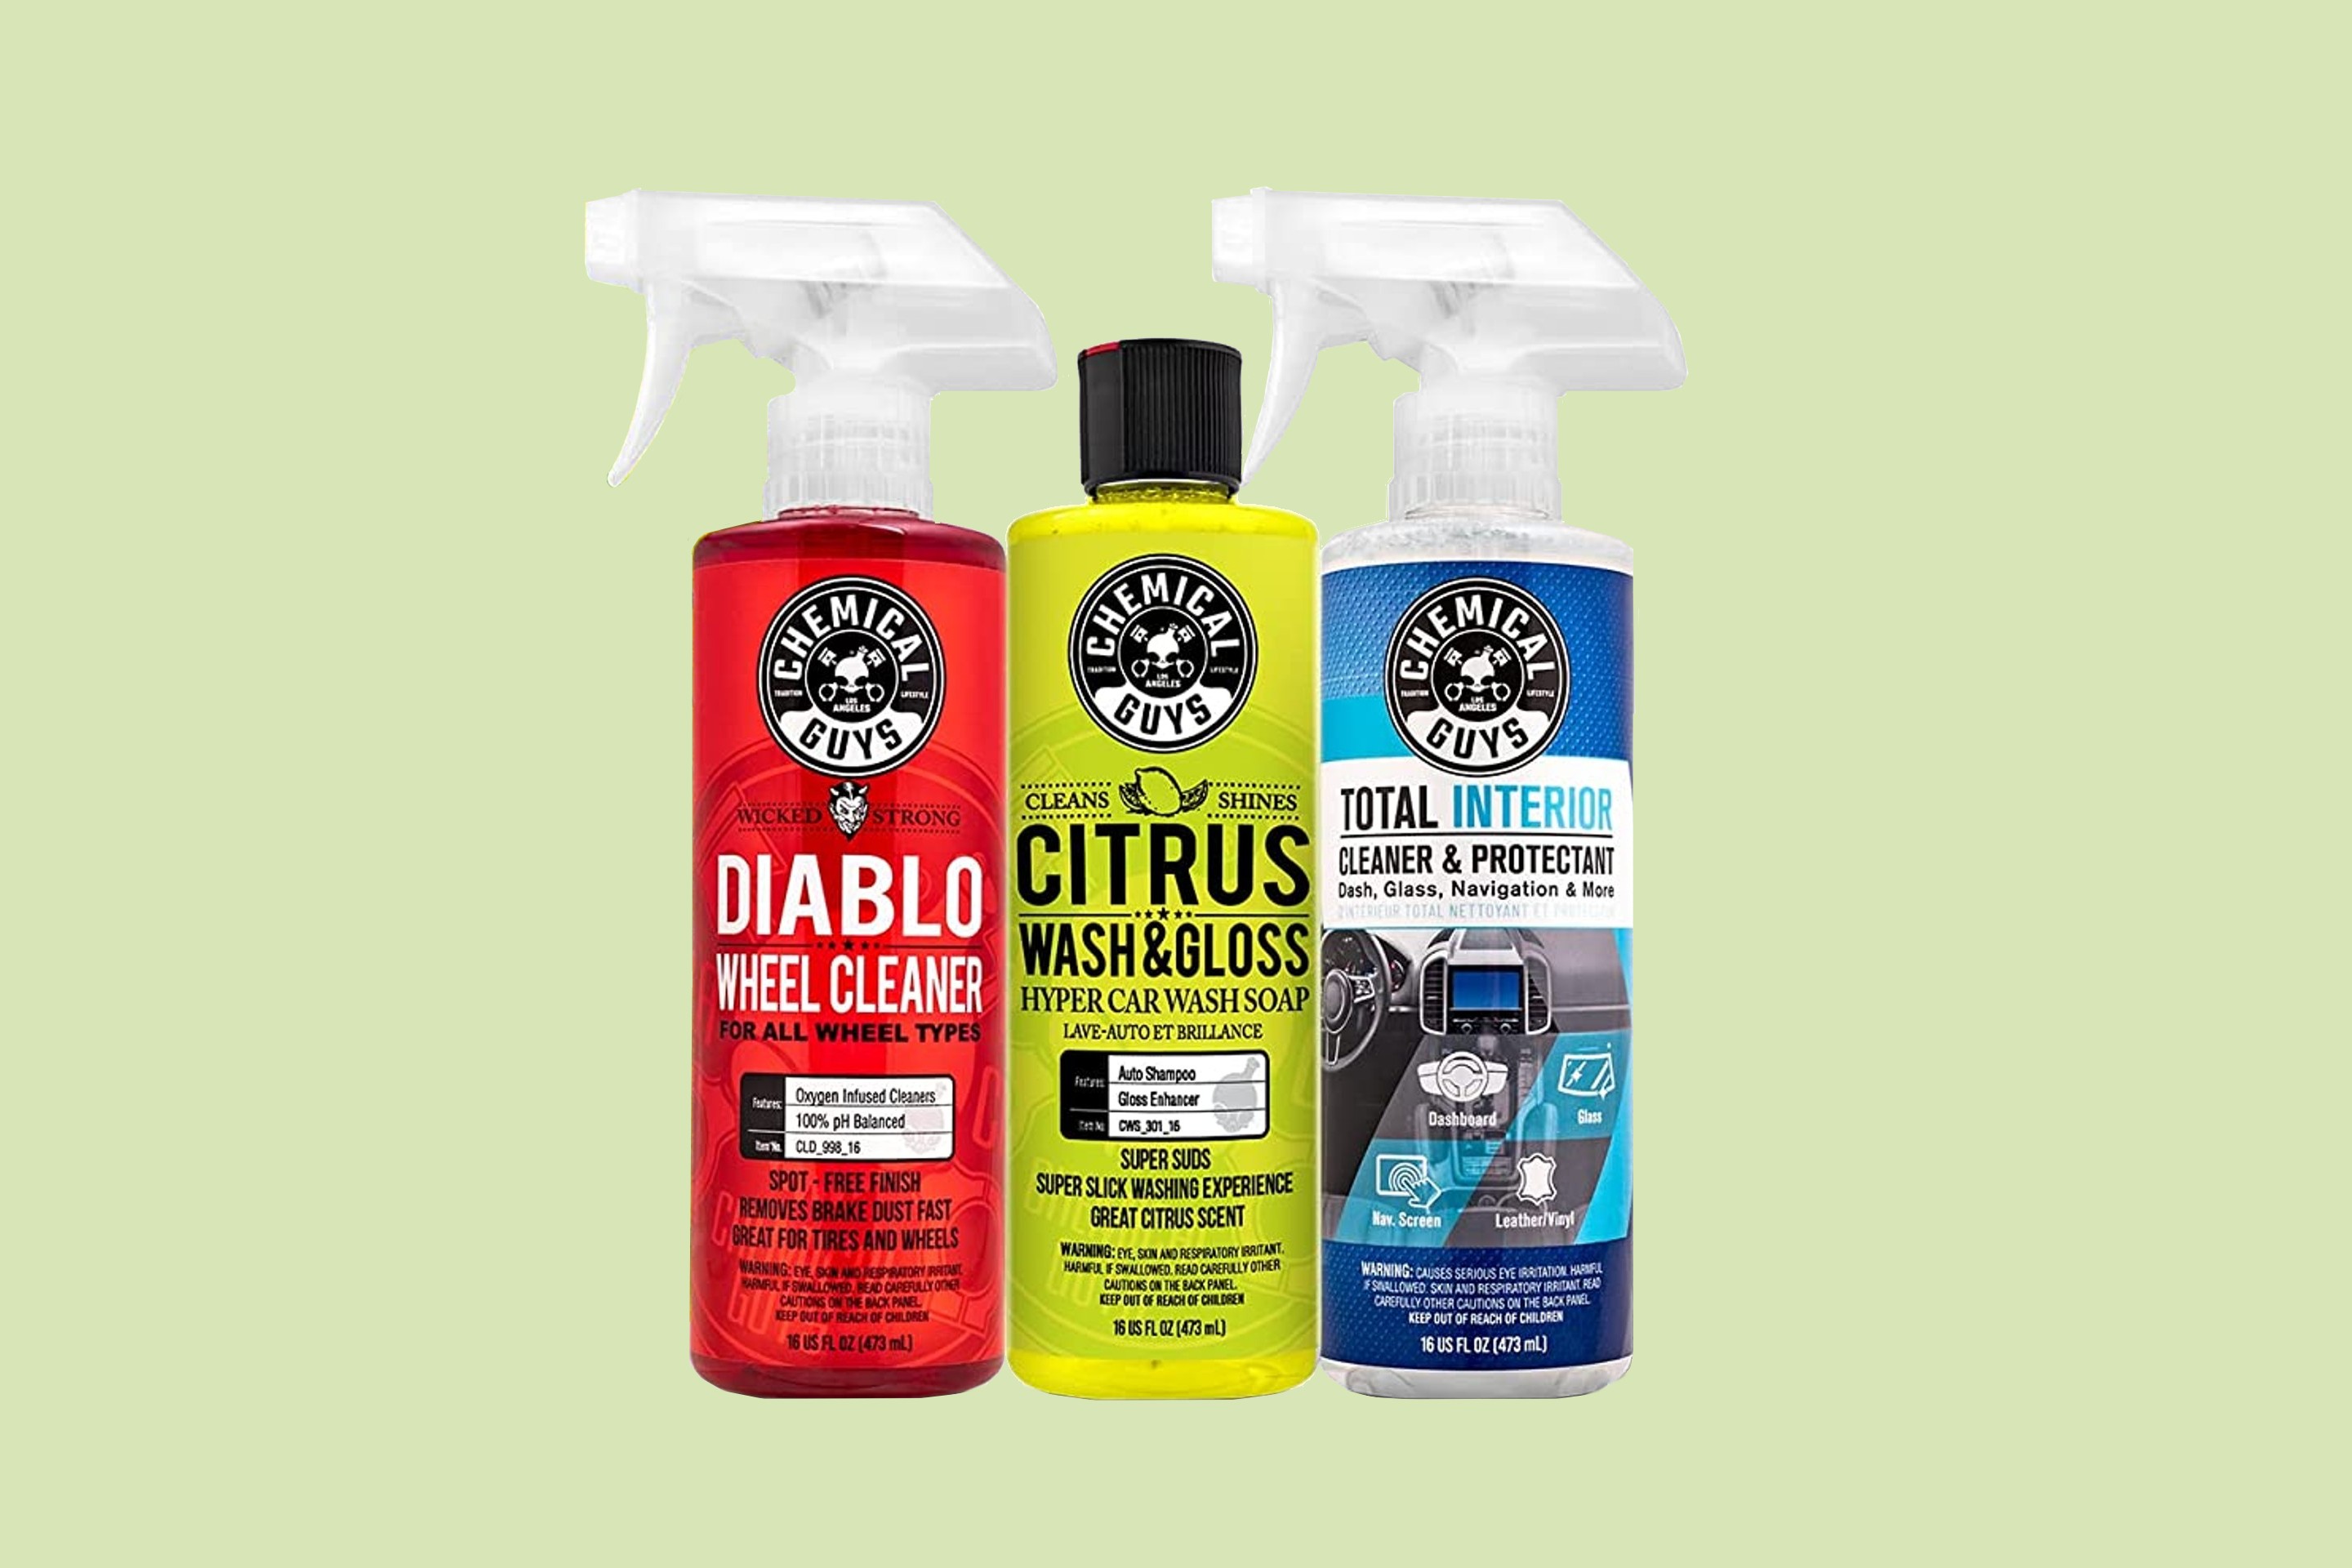 Save 25% on Car Cleaning Essentials